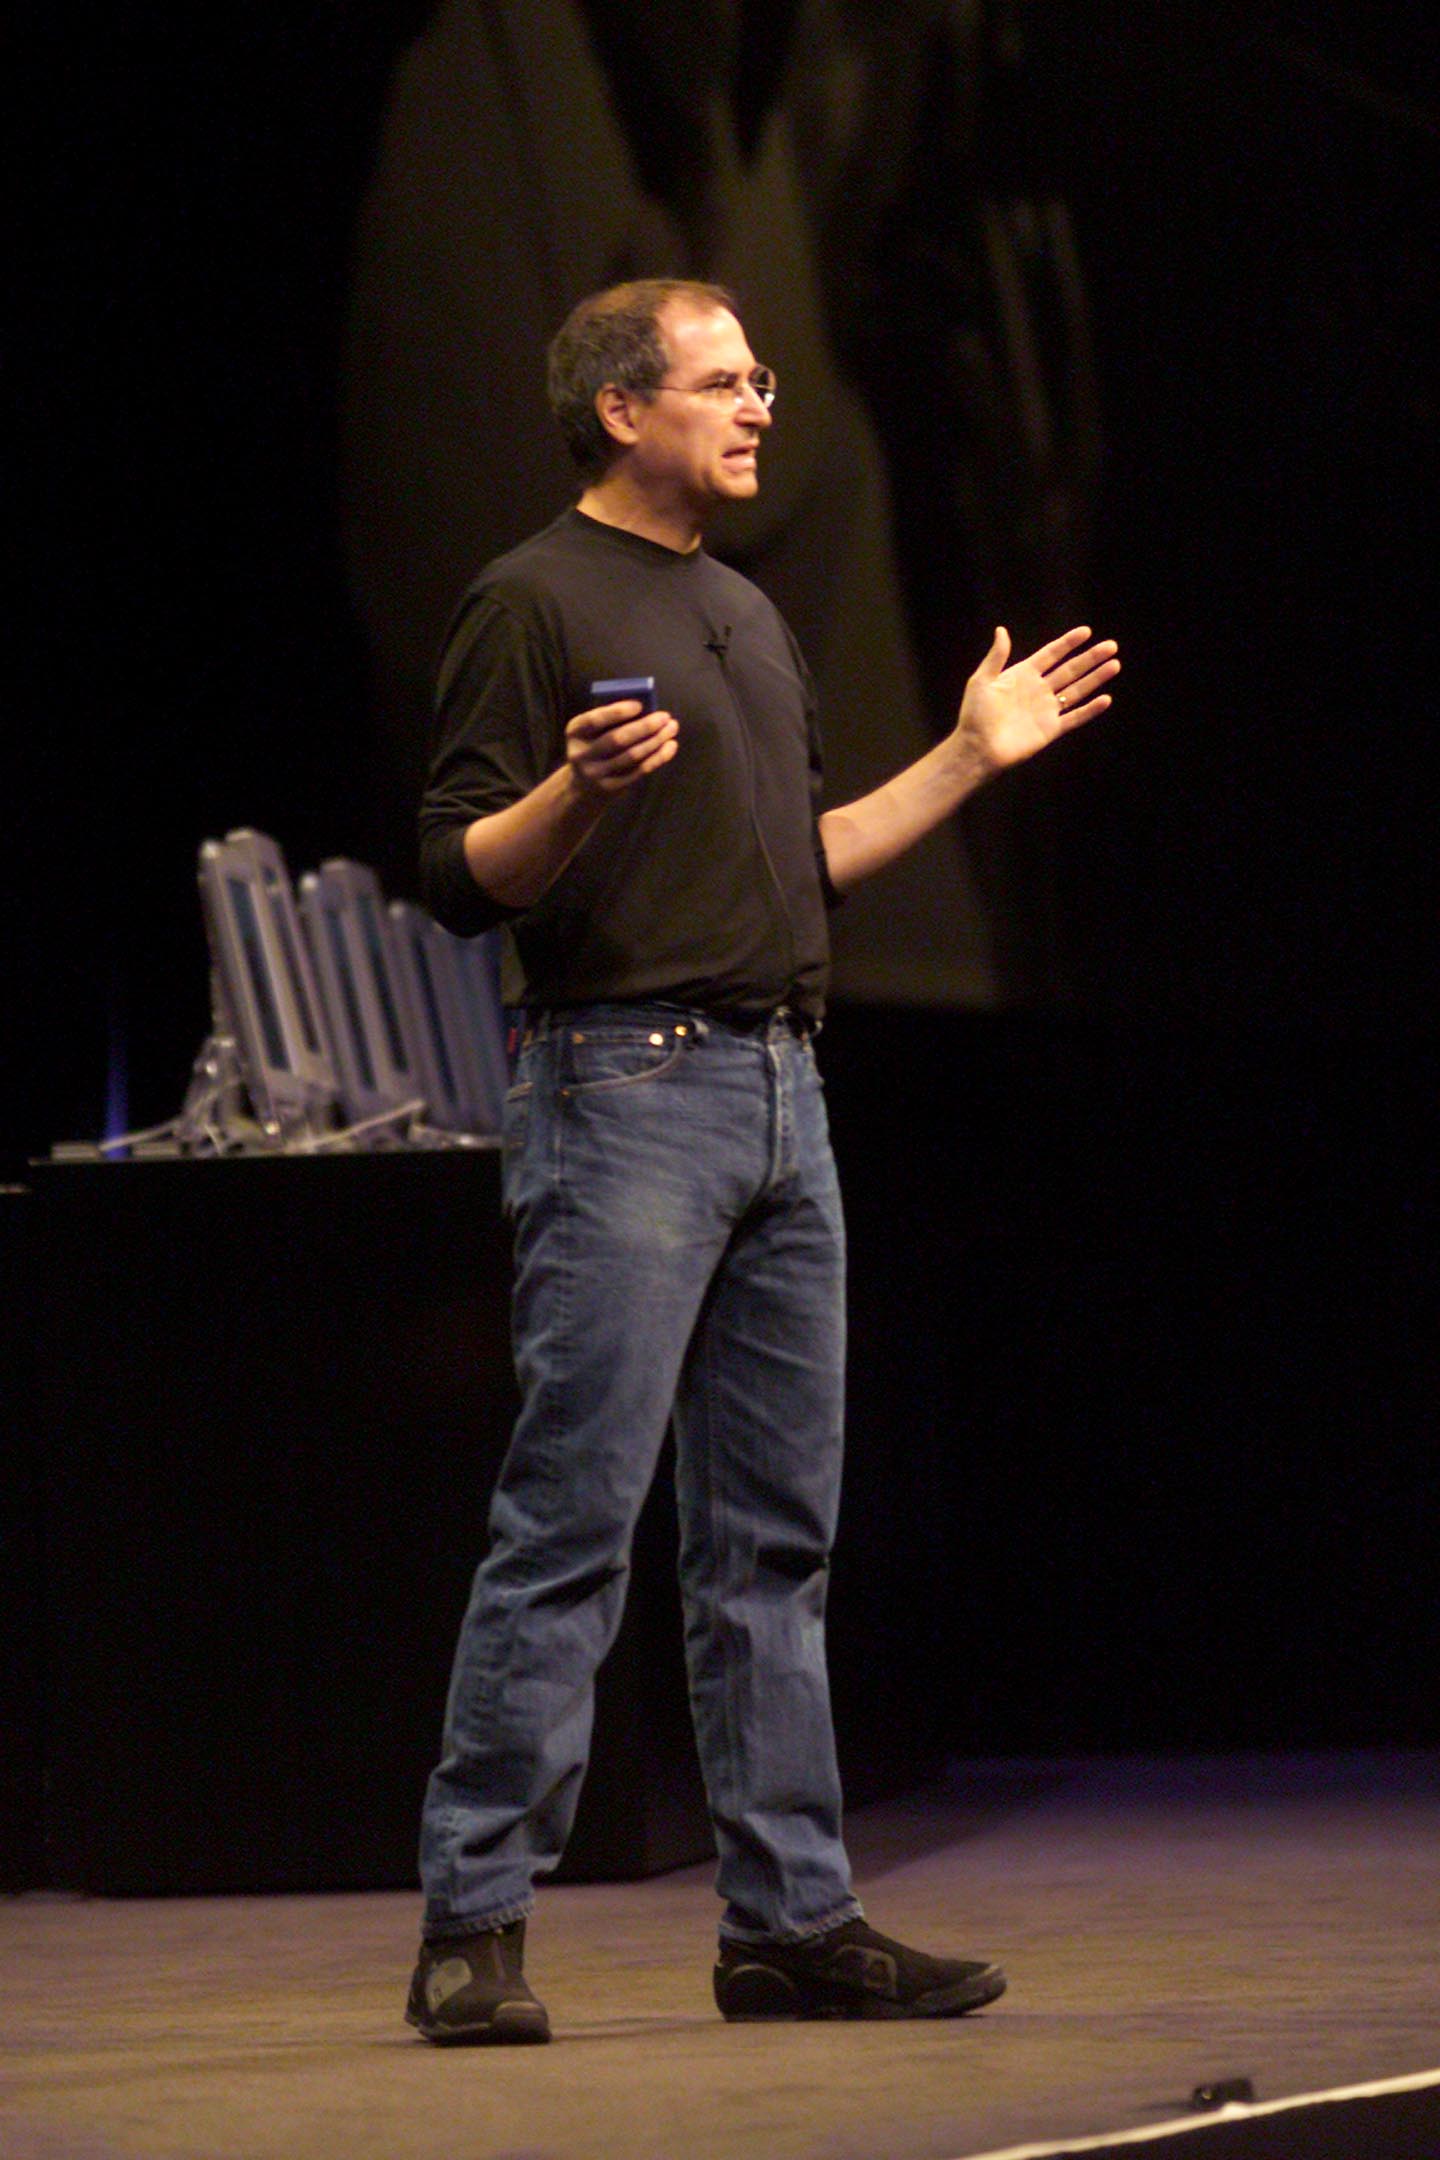 Steve Jobs at the Macworld Expo in New York City in 2001 | Source: Getty Images 